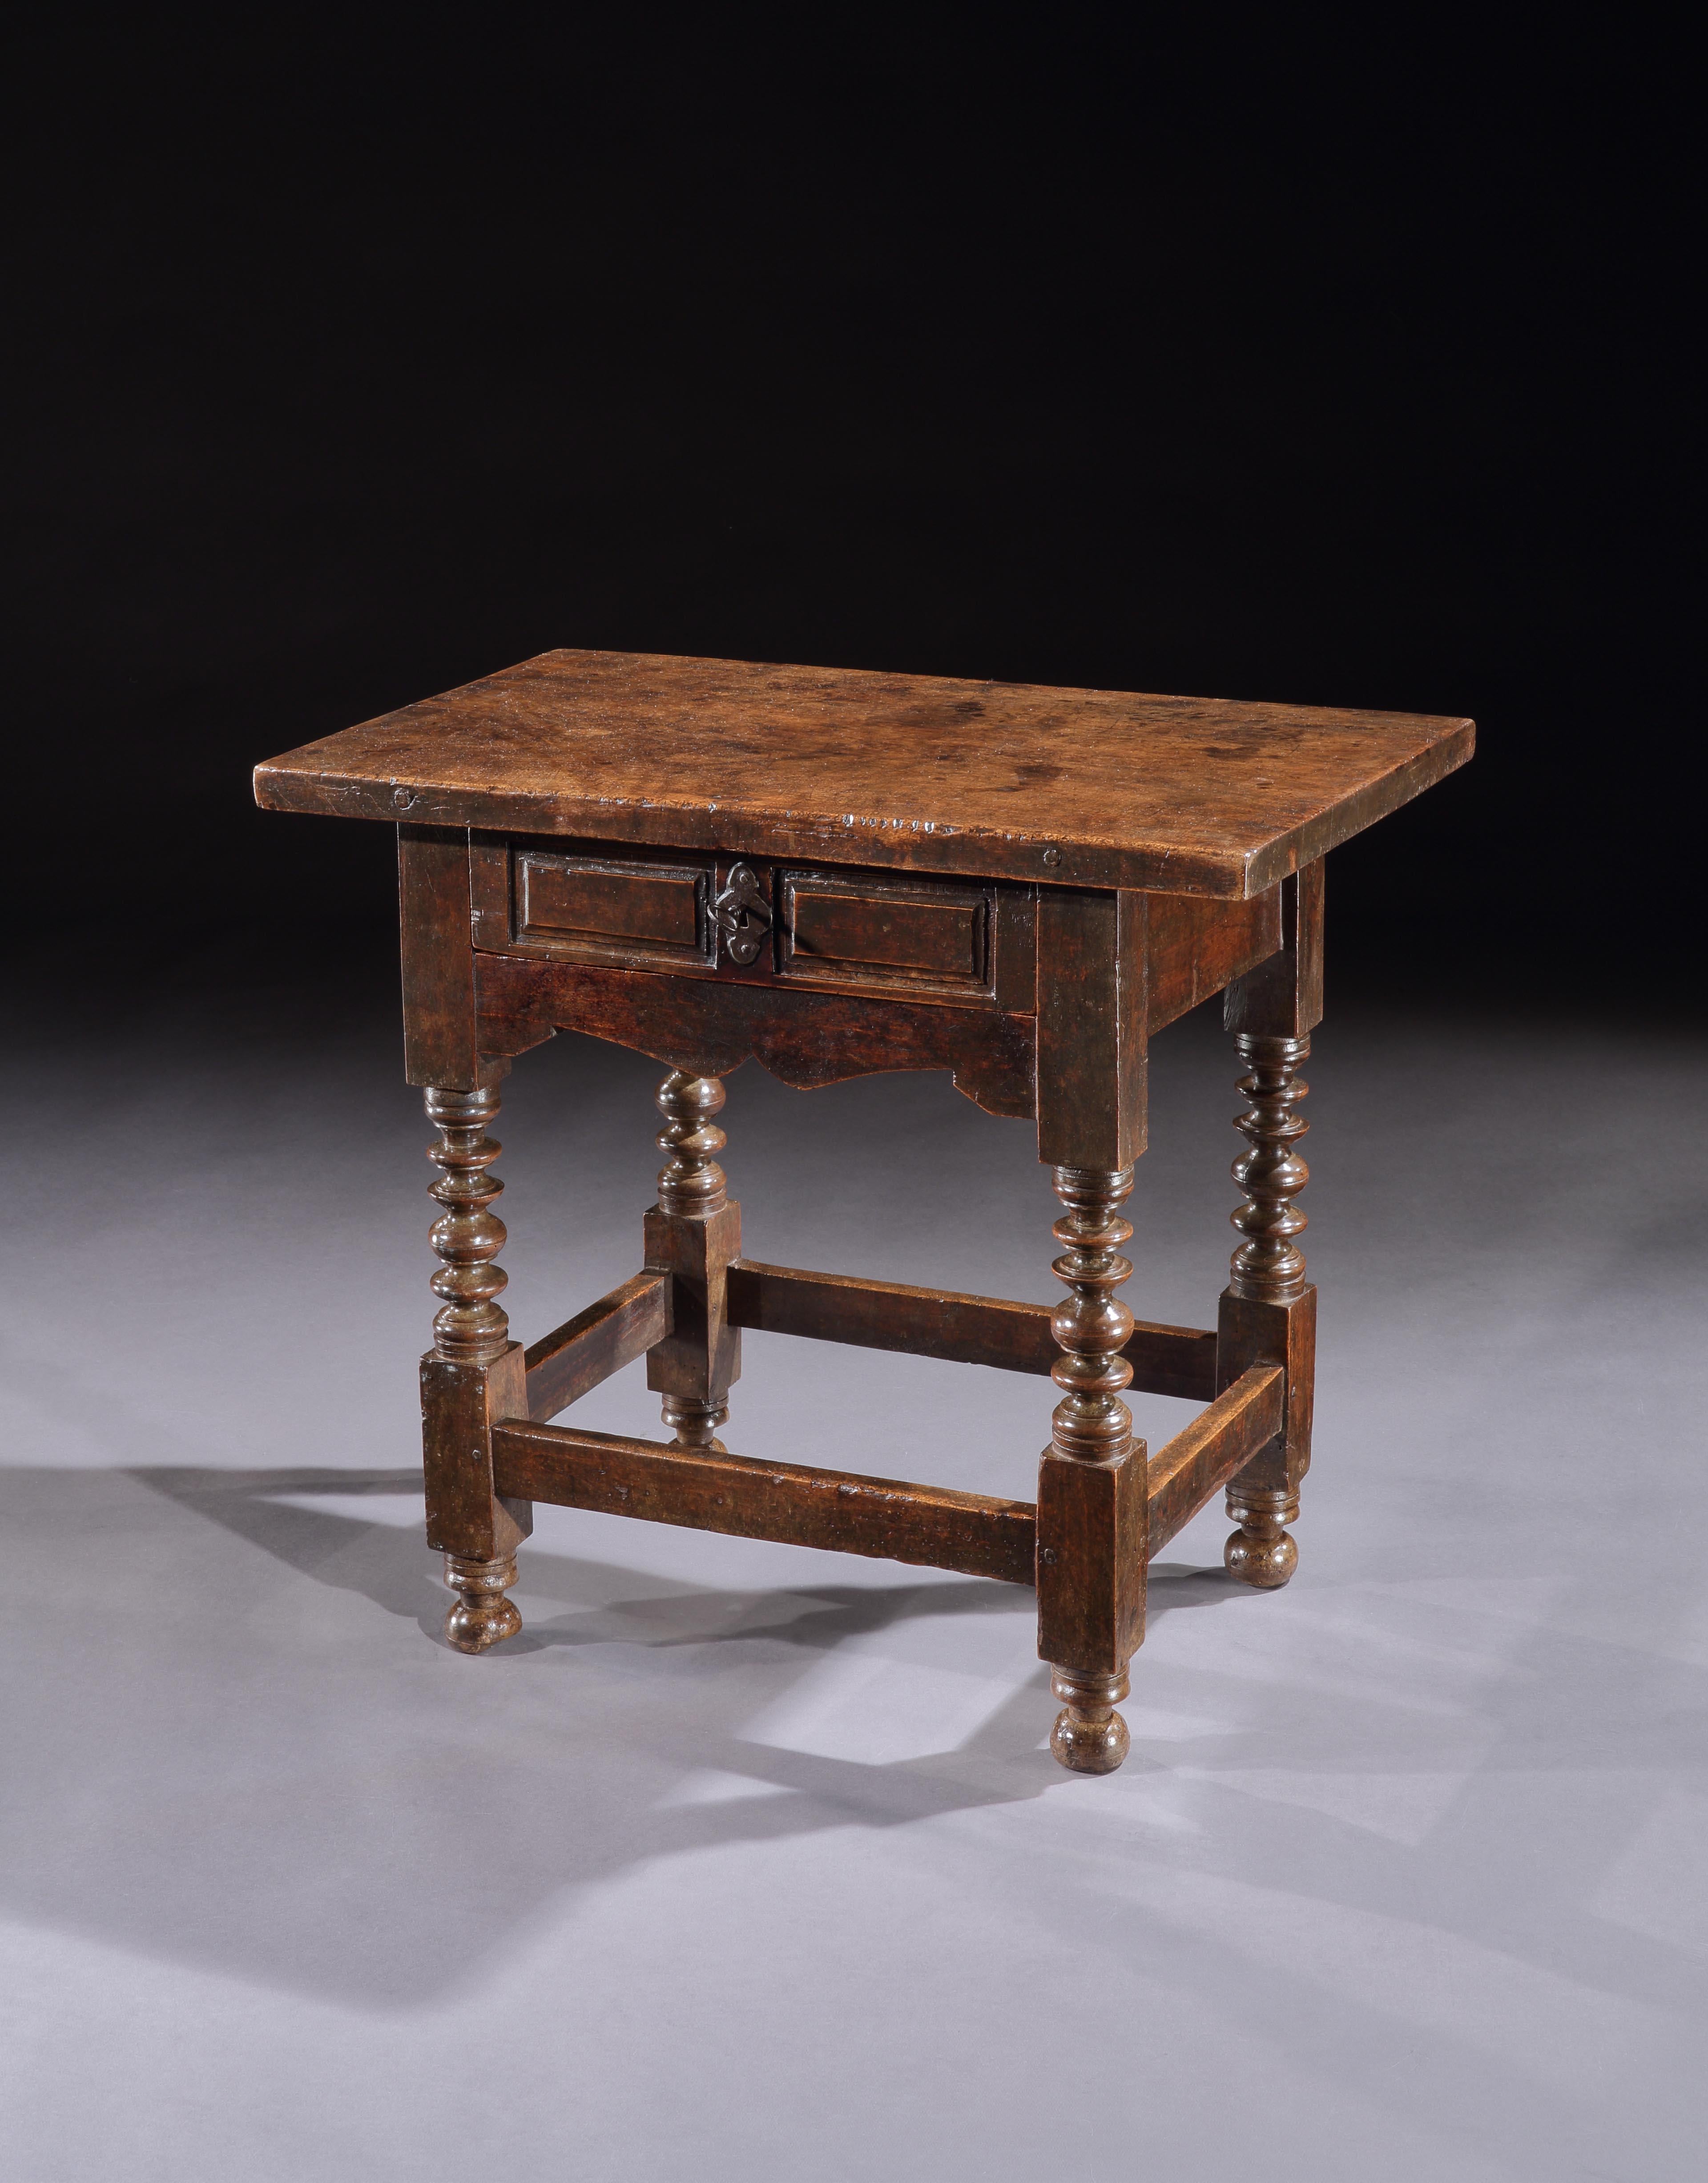 An exceptional, Spanish, Baroque, walnut sidetable

As fine an example of this classic model exhibiting all the desirable features of Spanish Baroque furniture as can be sourced. 

Spanish tables are prized for their characteristically thick,